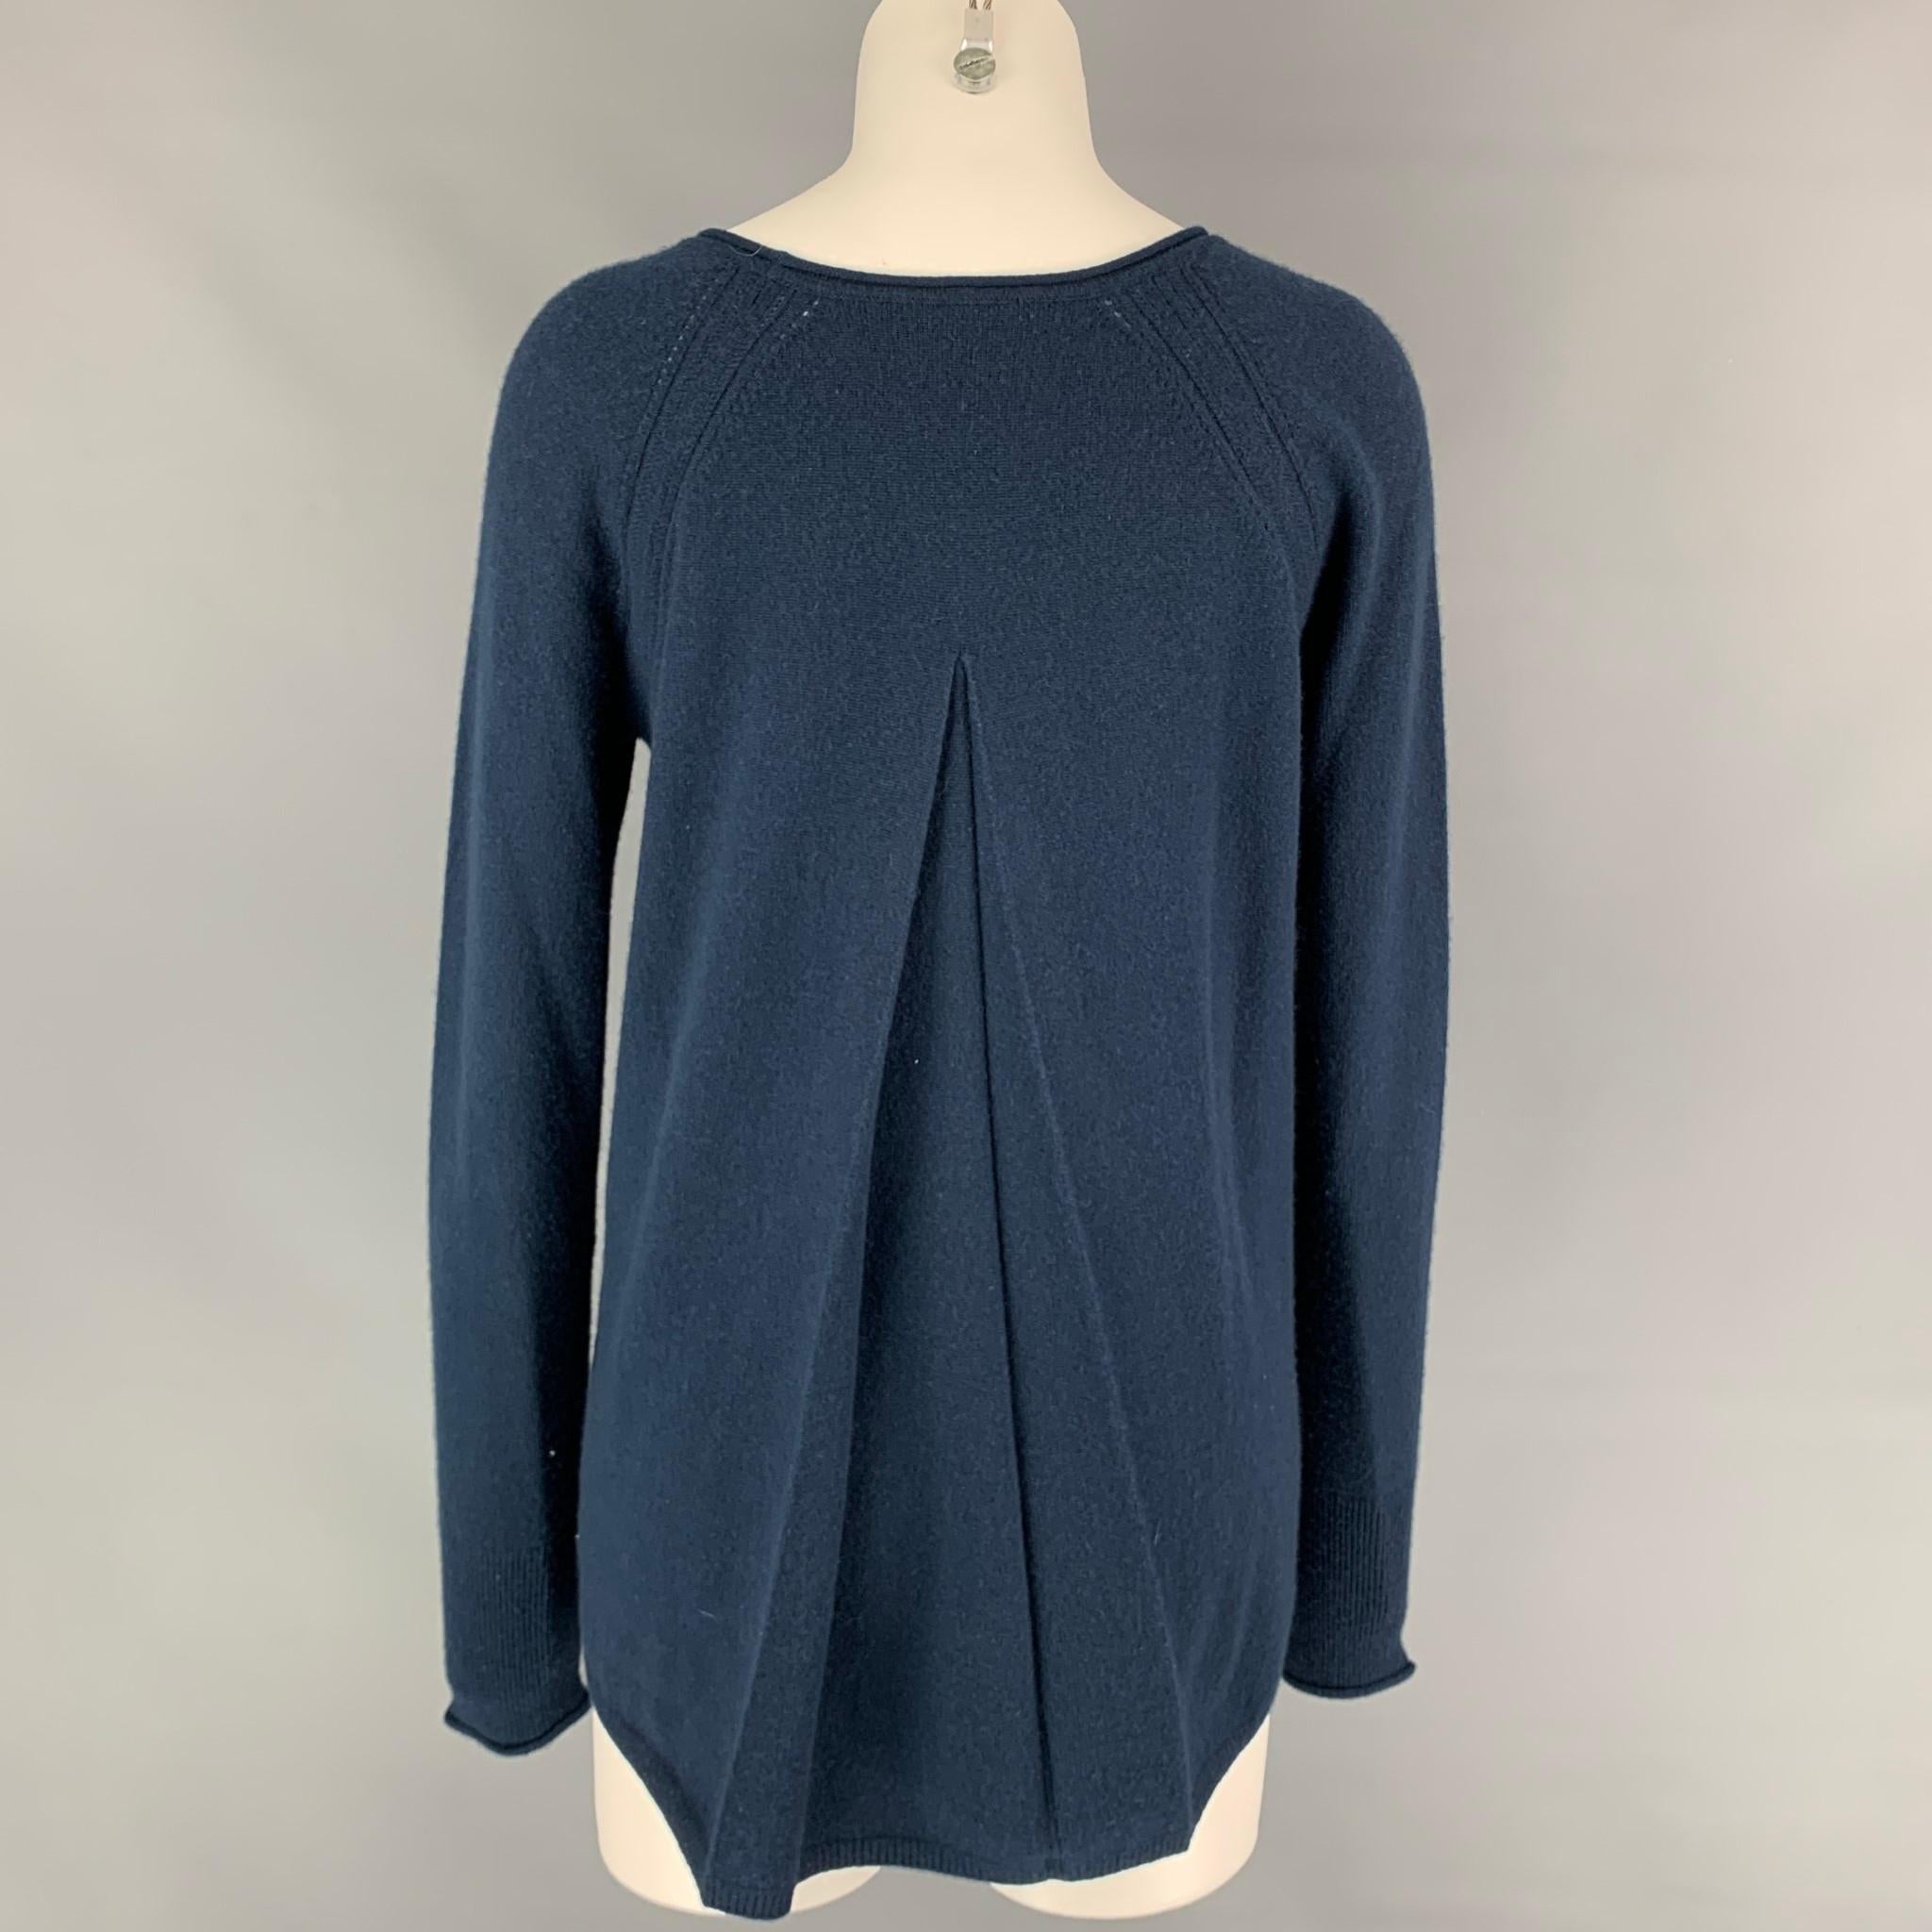 LORO PIANA pullover sweater comes in a navy cashmere featuring an a-line fit, long sleeves, and a crew-neck. Made in Italy.  Retail $1200.

Very Good Pre-Owned Condition.
Marked: 42

Measurements:

Shoulder: 18 in.
Bust: 39 in.
Sleeve: 26.5